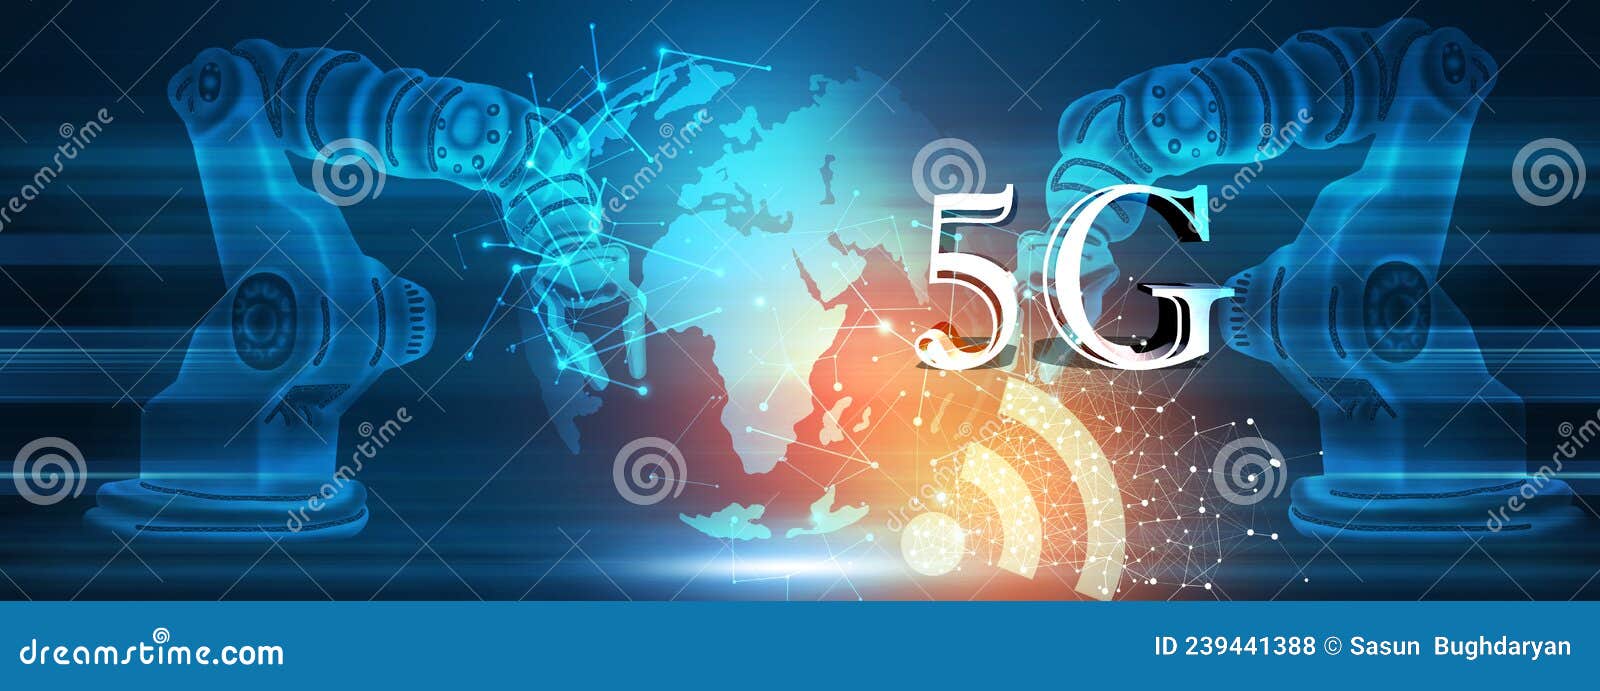 planet and 5g on the background of robotics